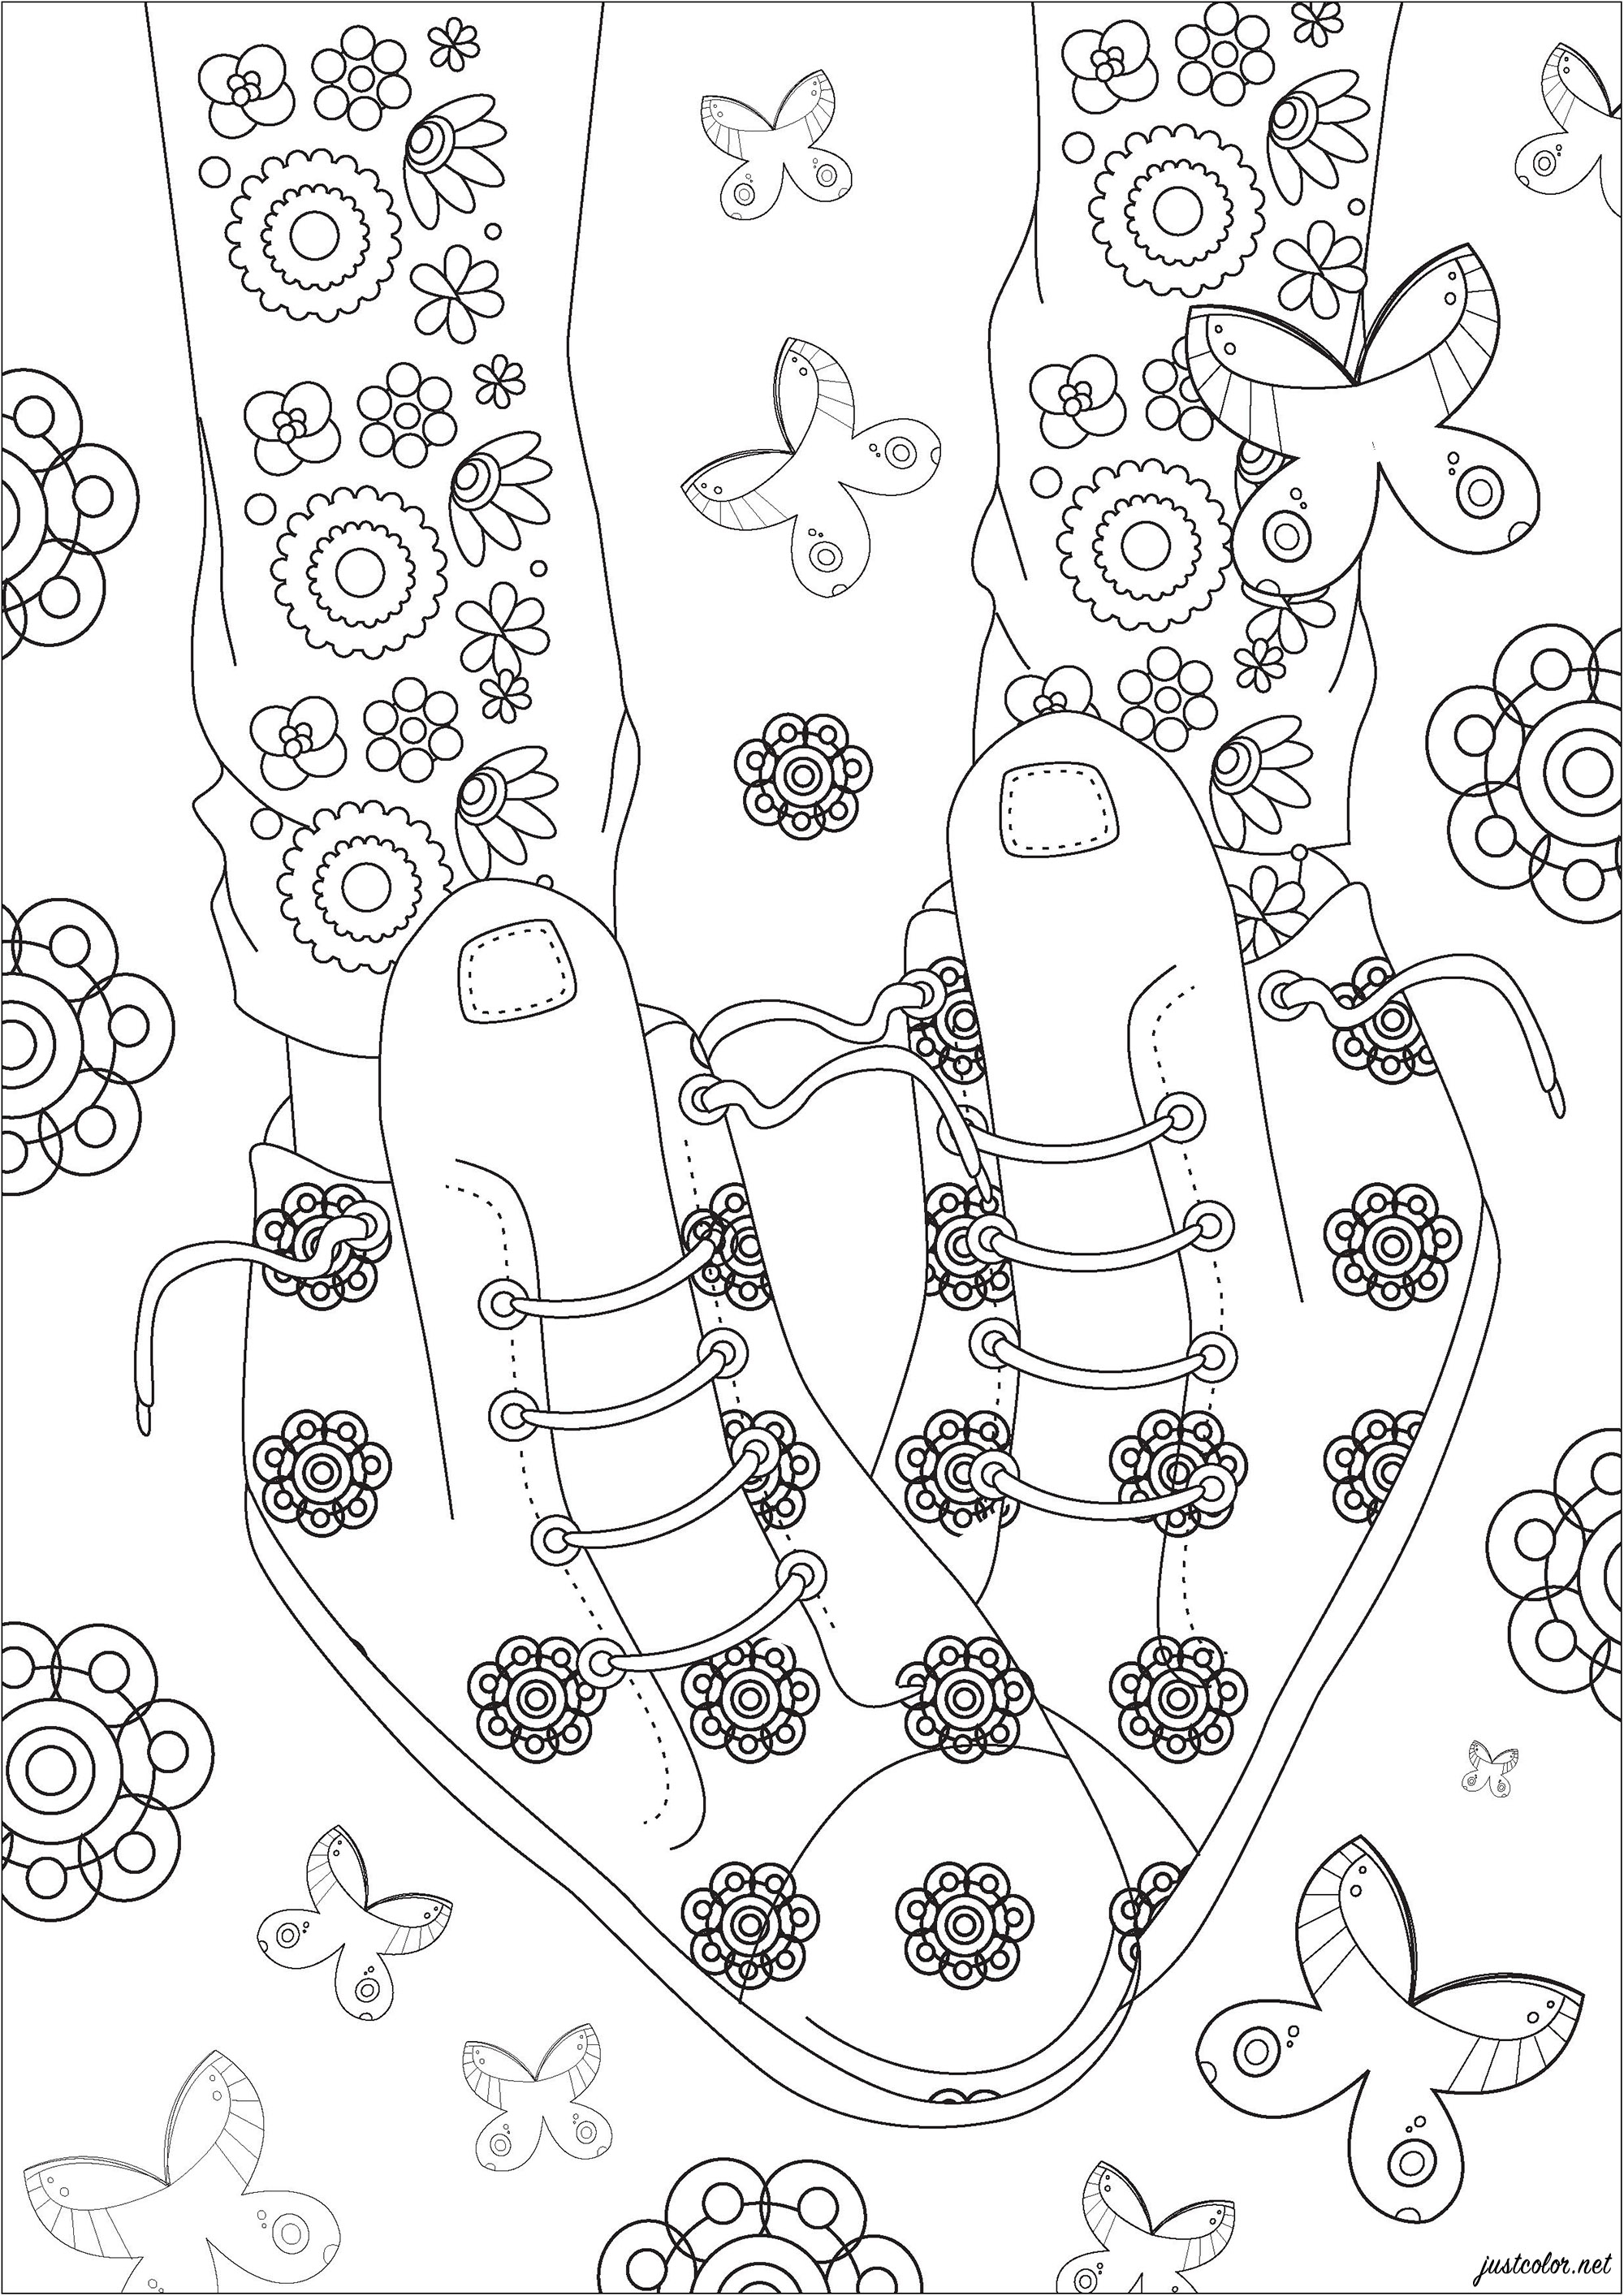 Shoes and laces - Anti stress Adult Coloring Pages